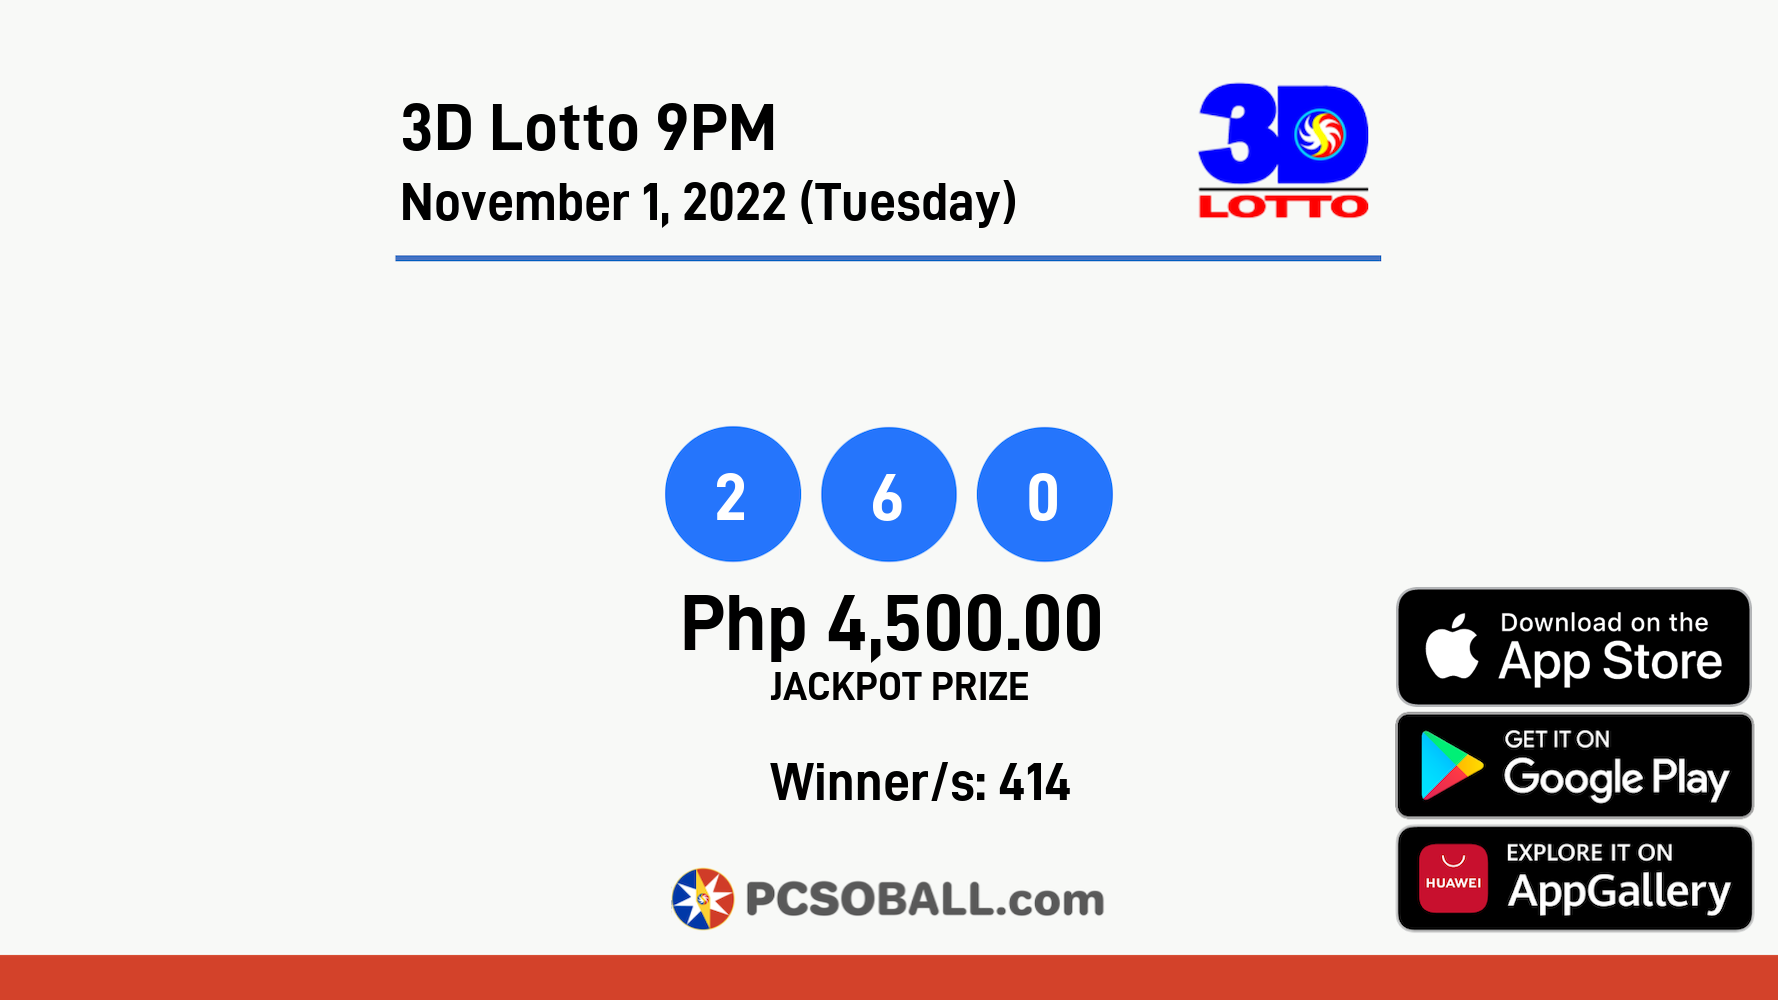 3D Lotto 9PM November 1, 2022 (Tuesday) Result